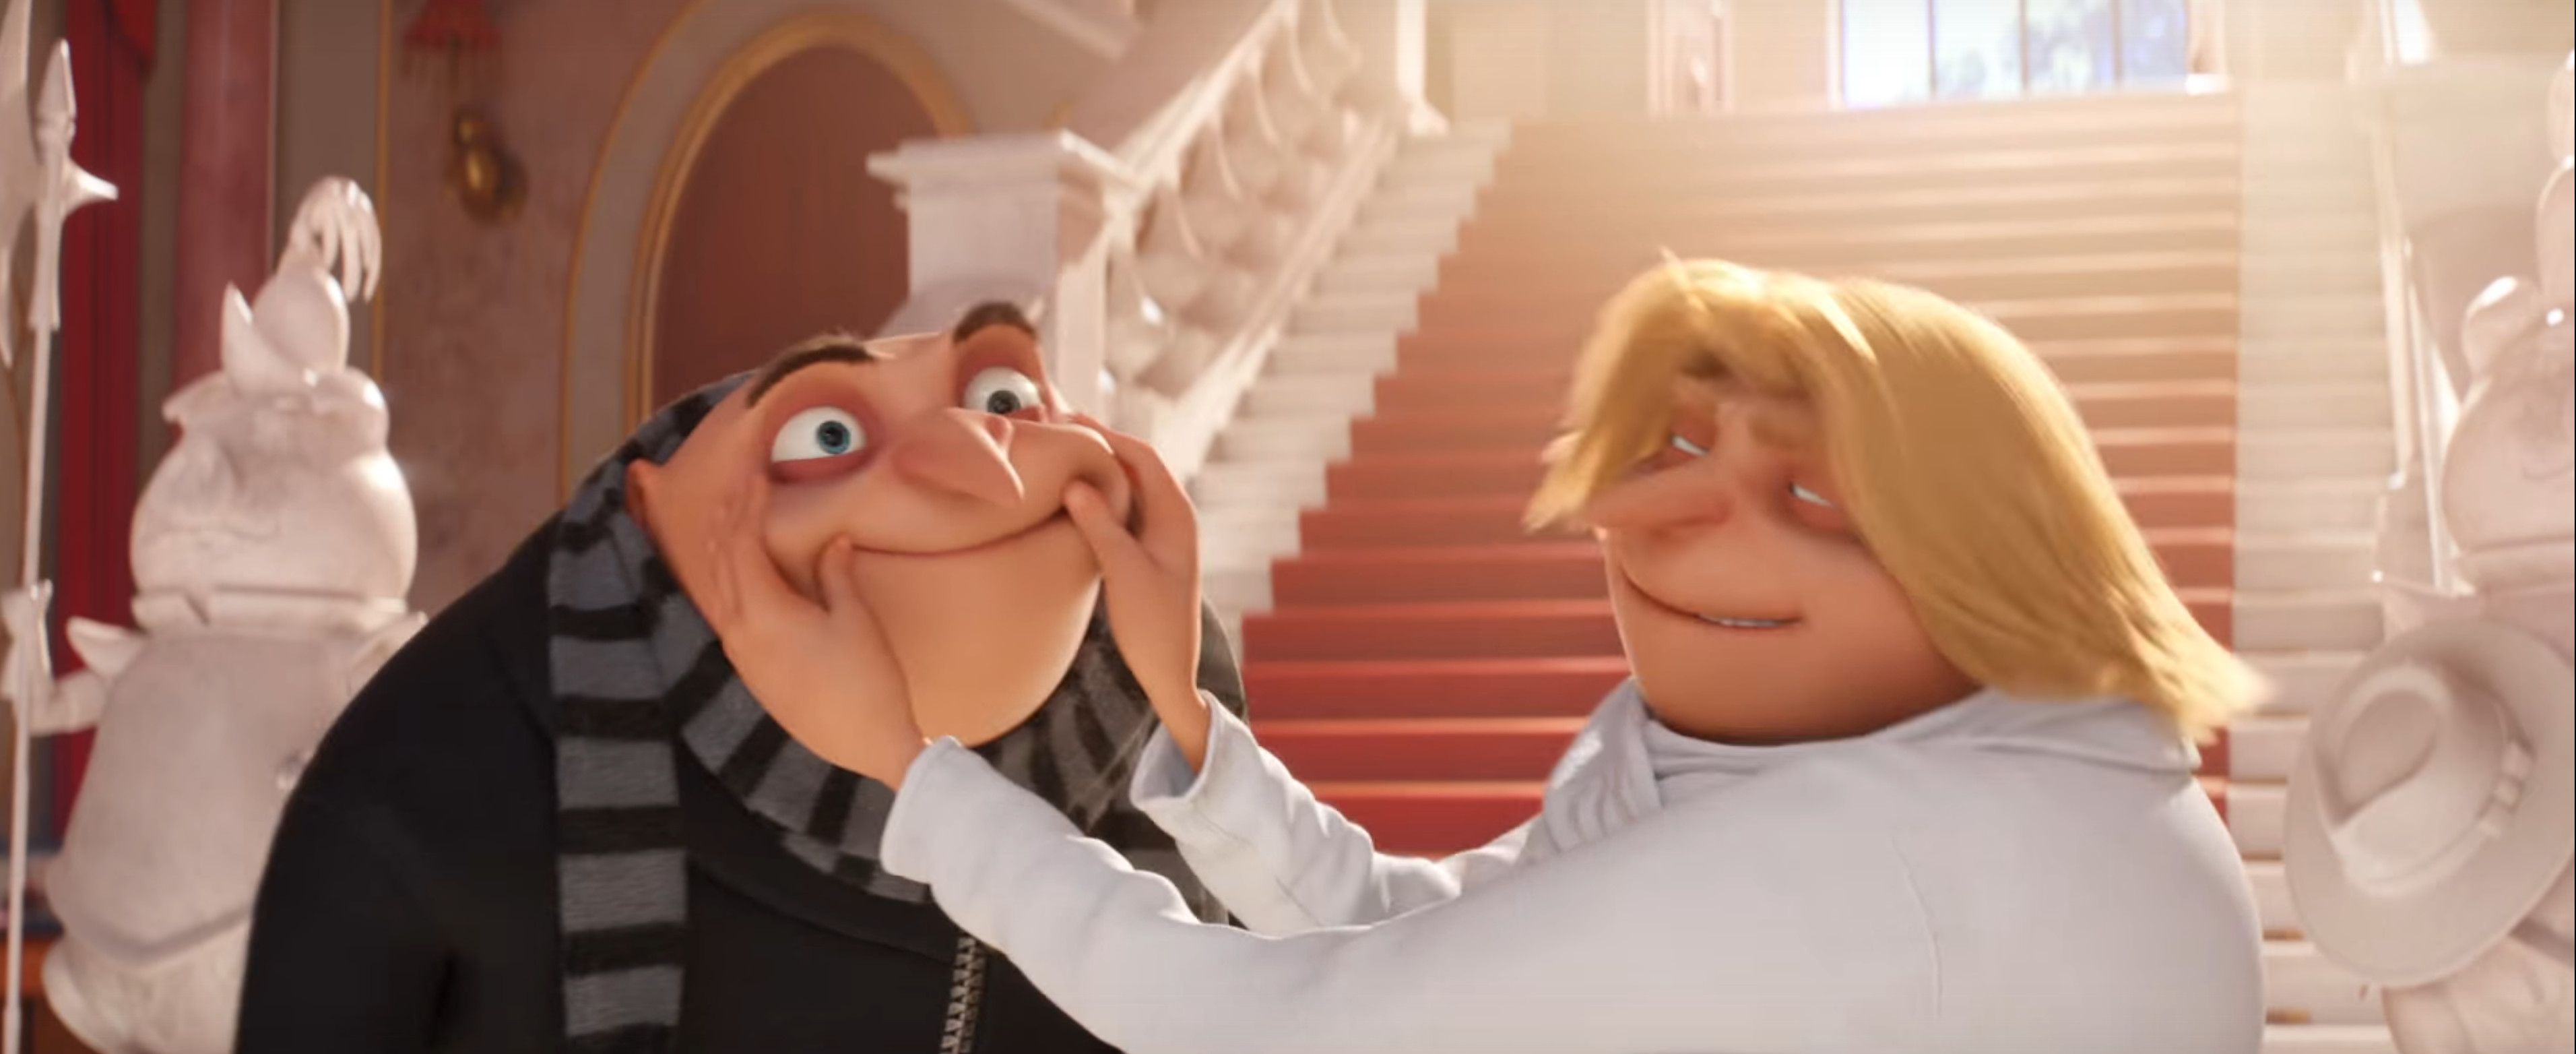 Gru Discovers He Has An Annoying Twin Brother In The Hilarious New Trailer For Despicable Me 3